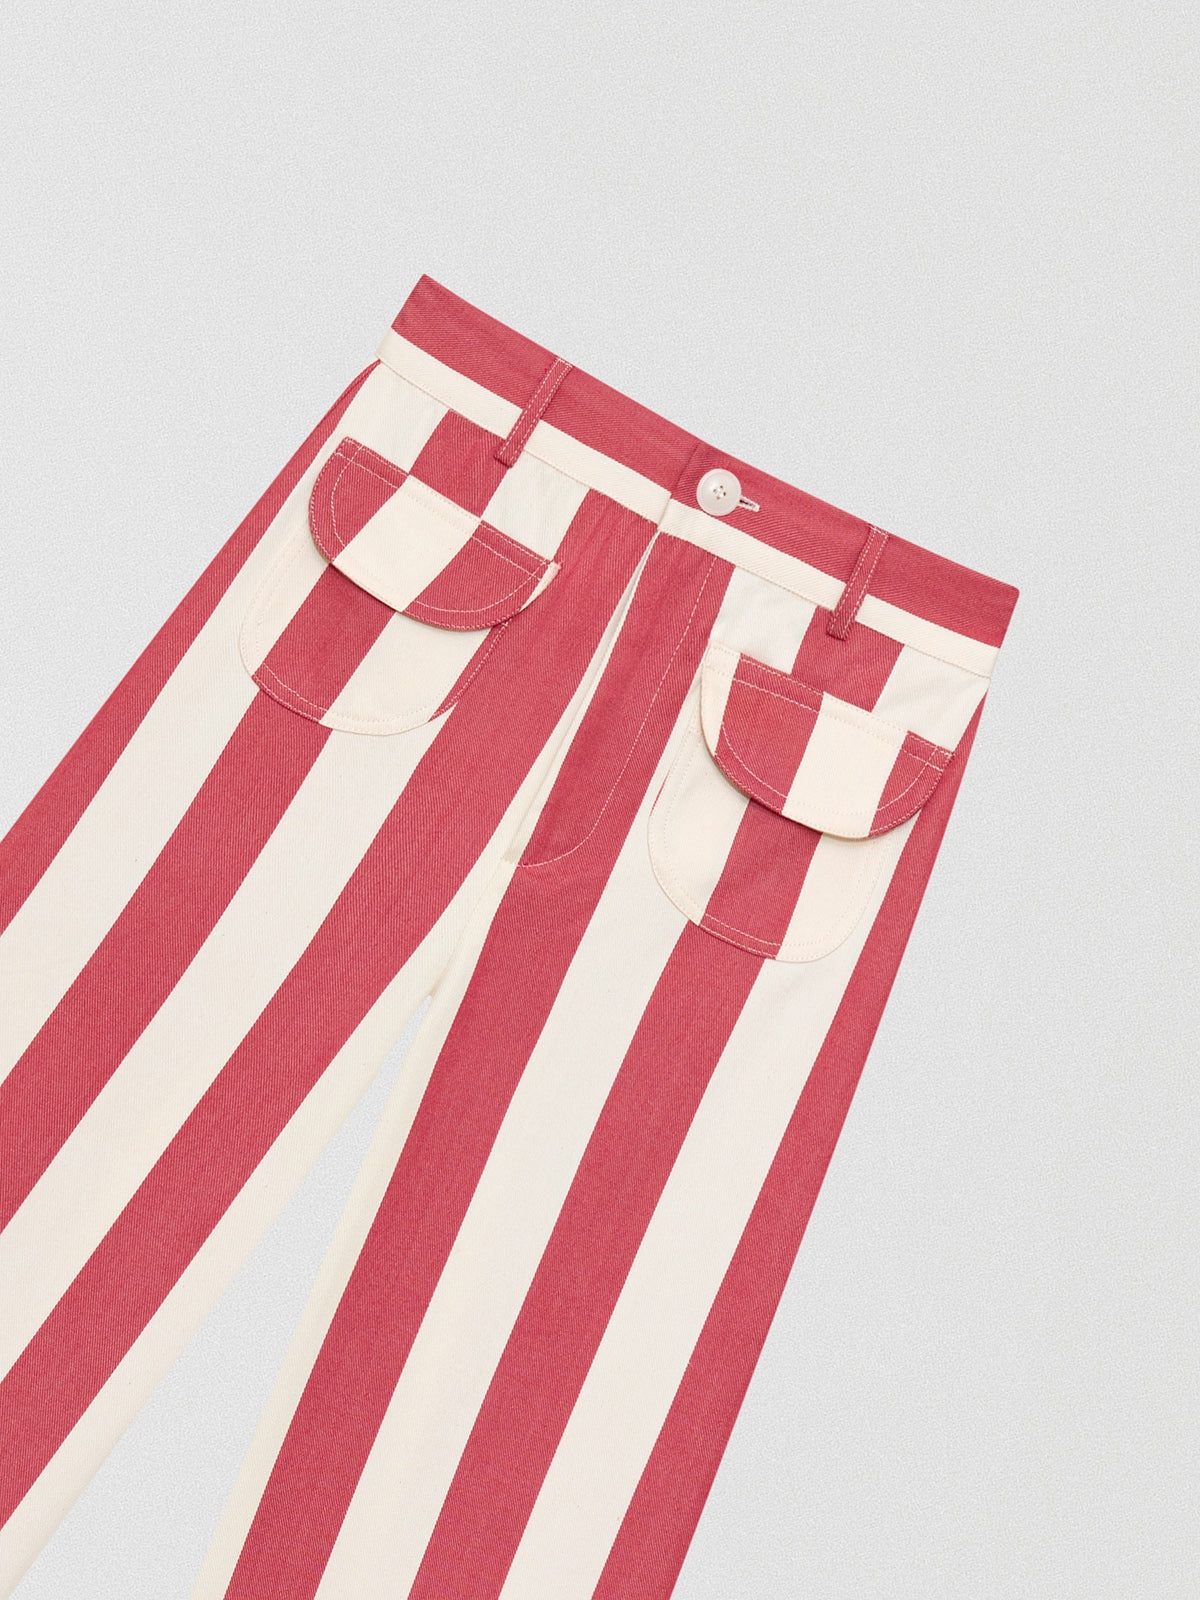 Red high-waisted trousers printed in cotton with red and ecru stripes.